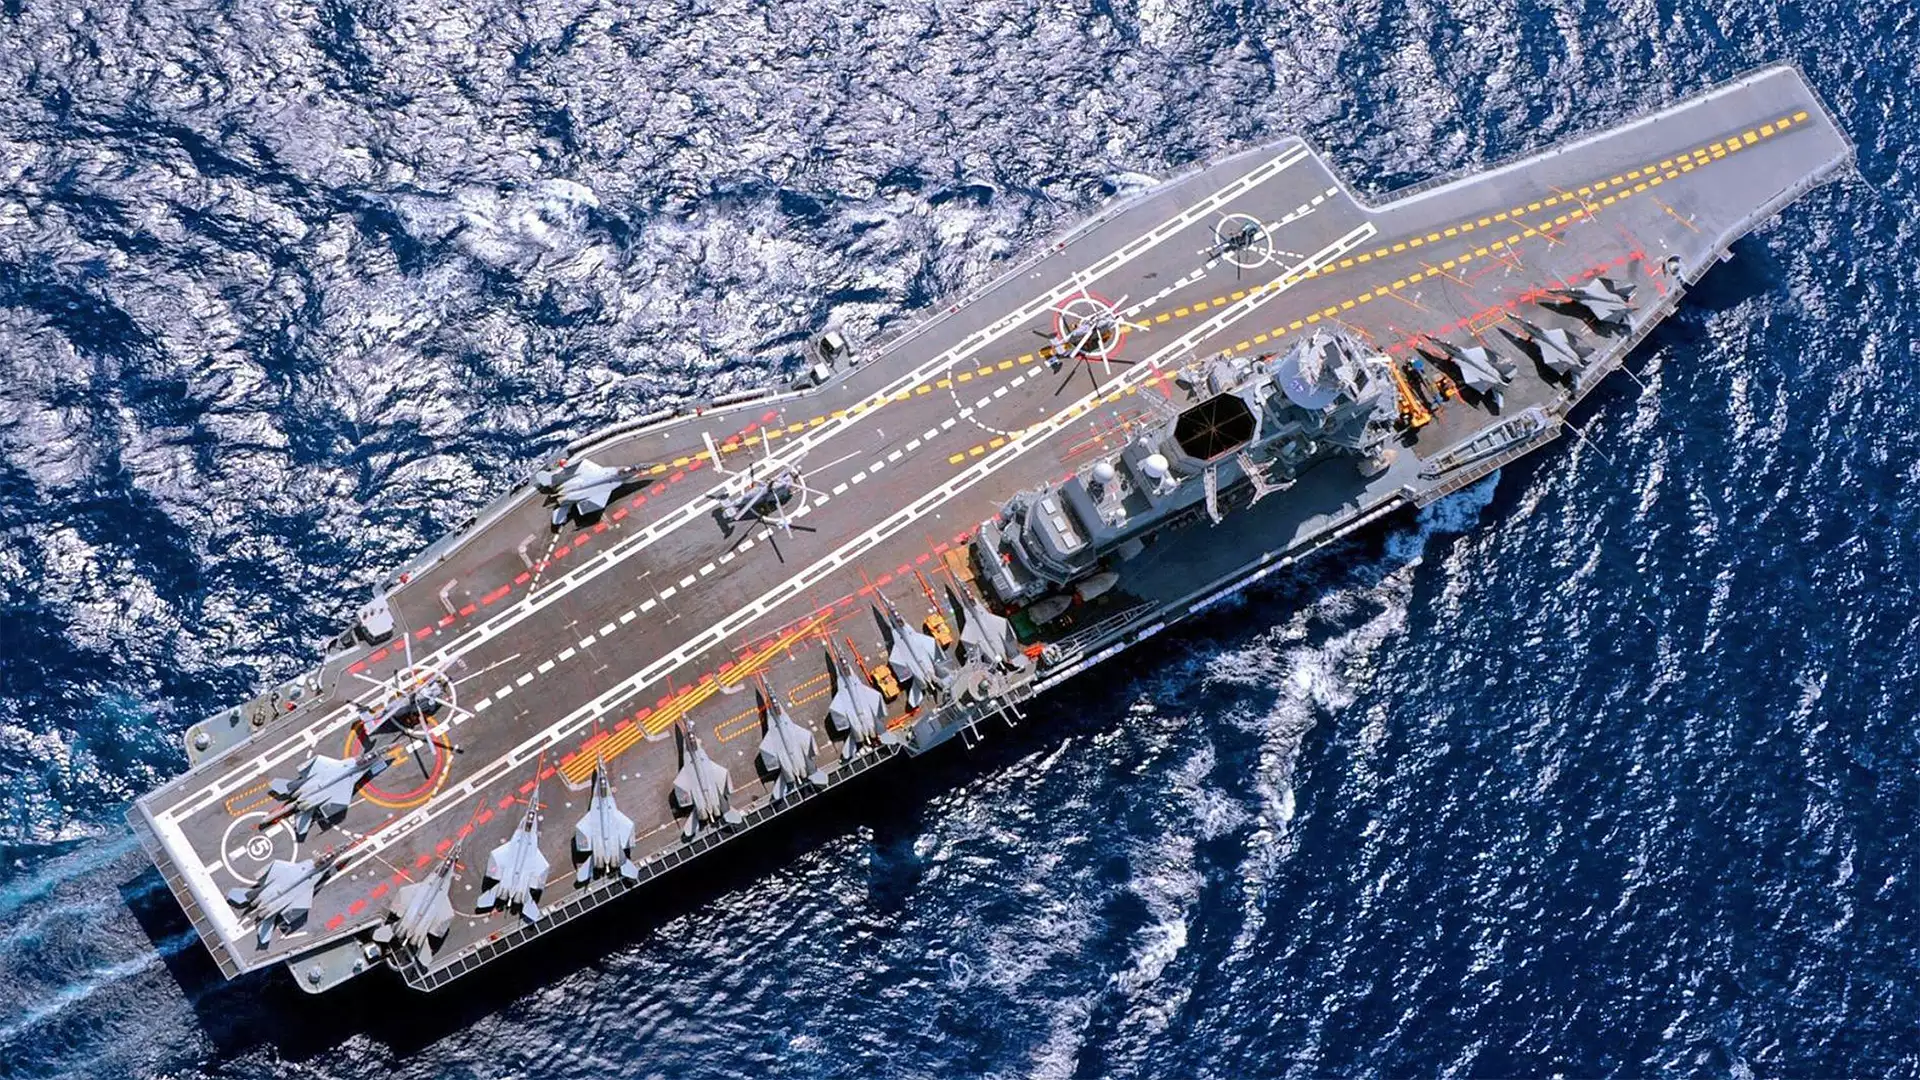 Indian Navy's sole aircraft carrier INS Vikramaditya [1920x1080]: WarshipPorn